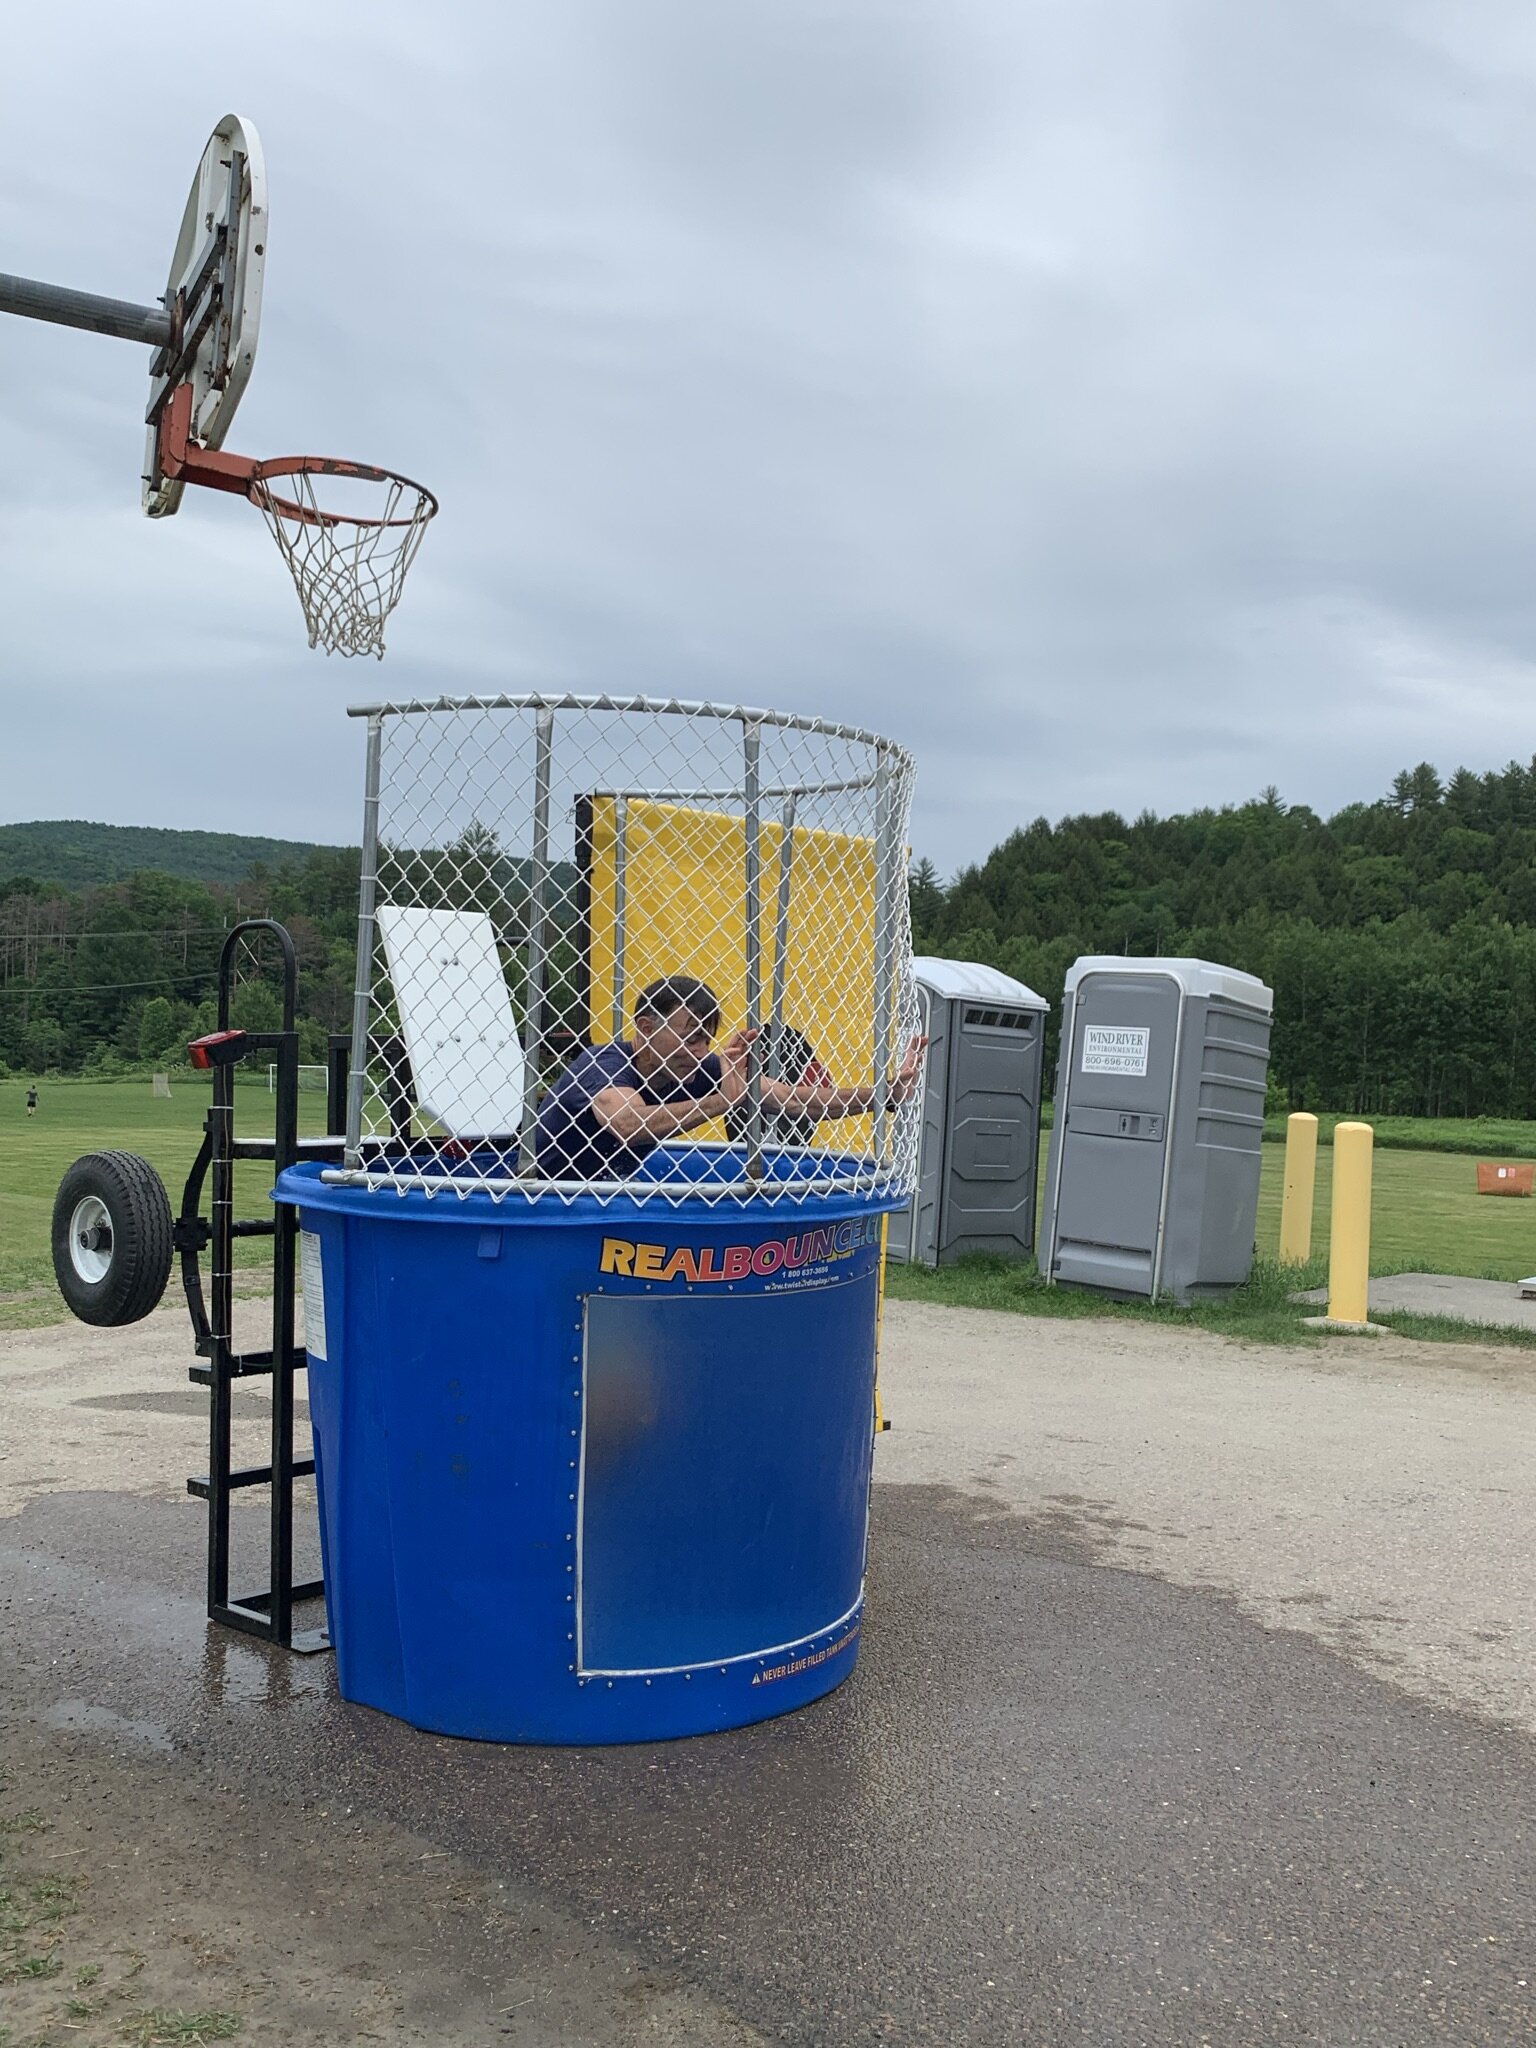  Math teacher Eric Eley may have lost count of how many times he got dunked. Photo by Lisa Scagliotti 